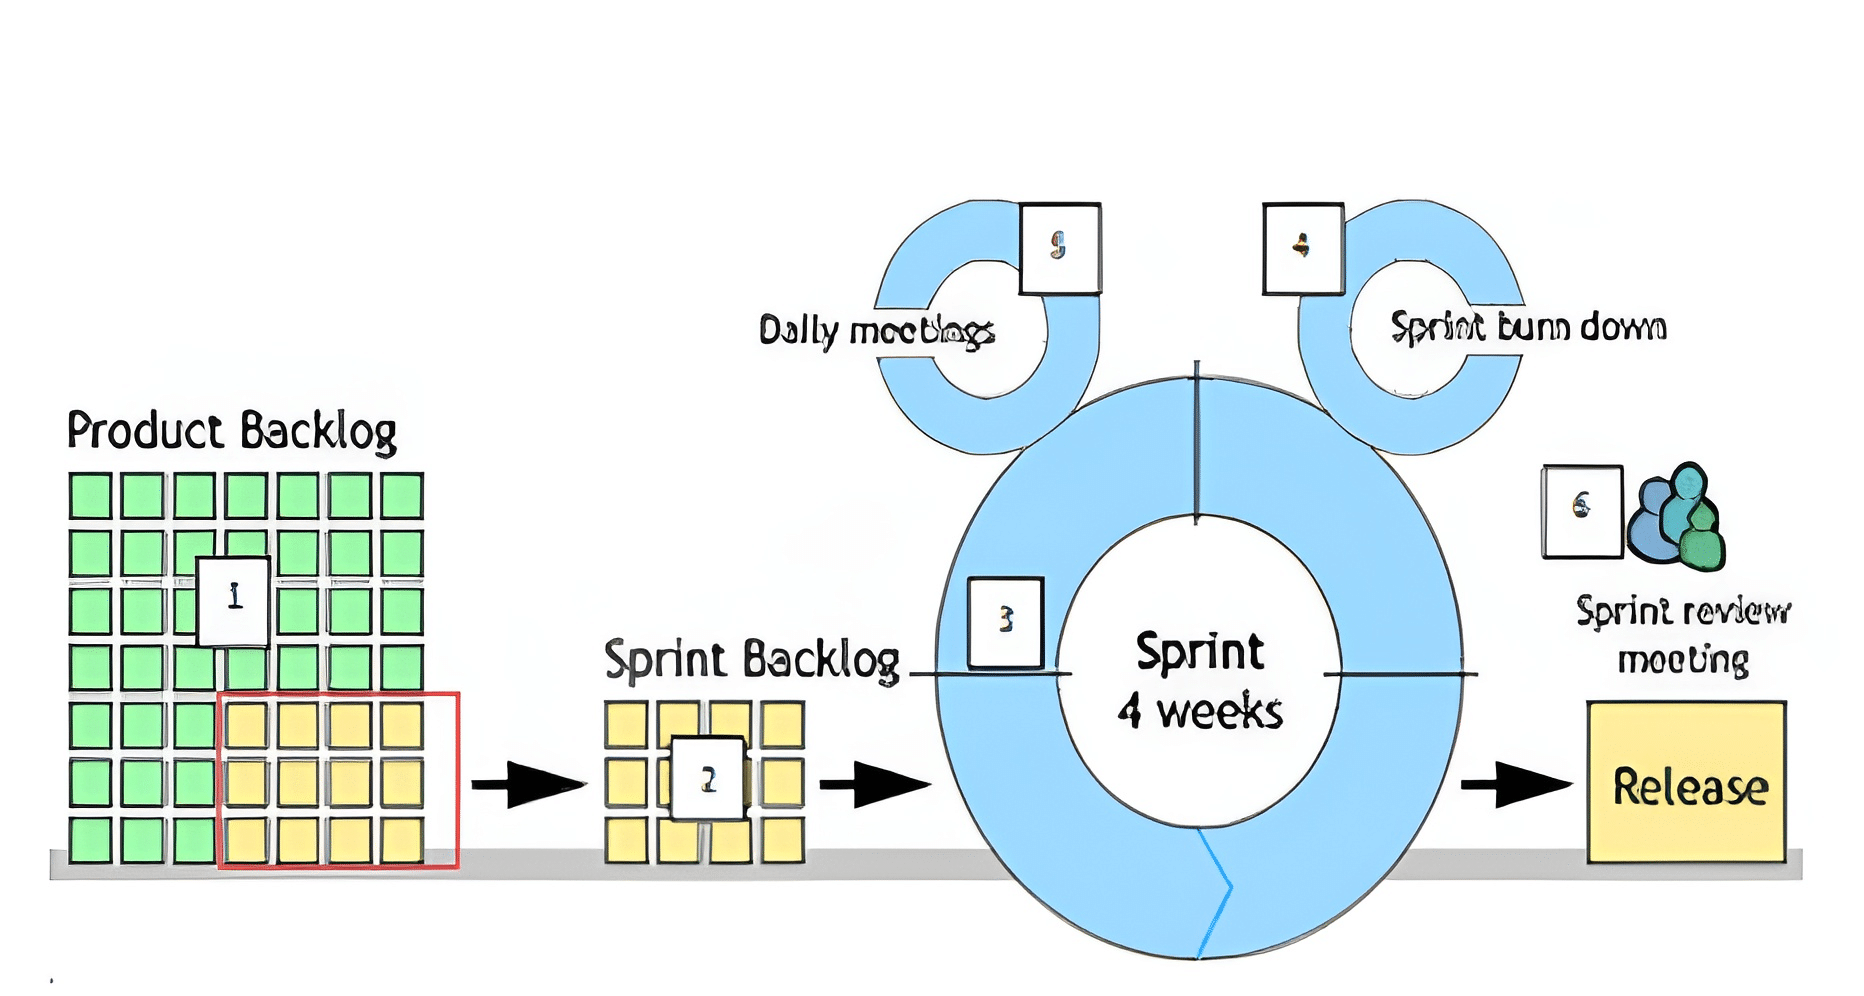 The process of the agile model